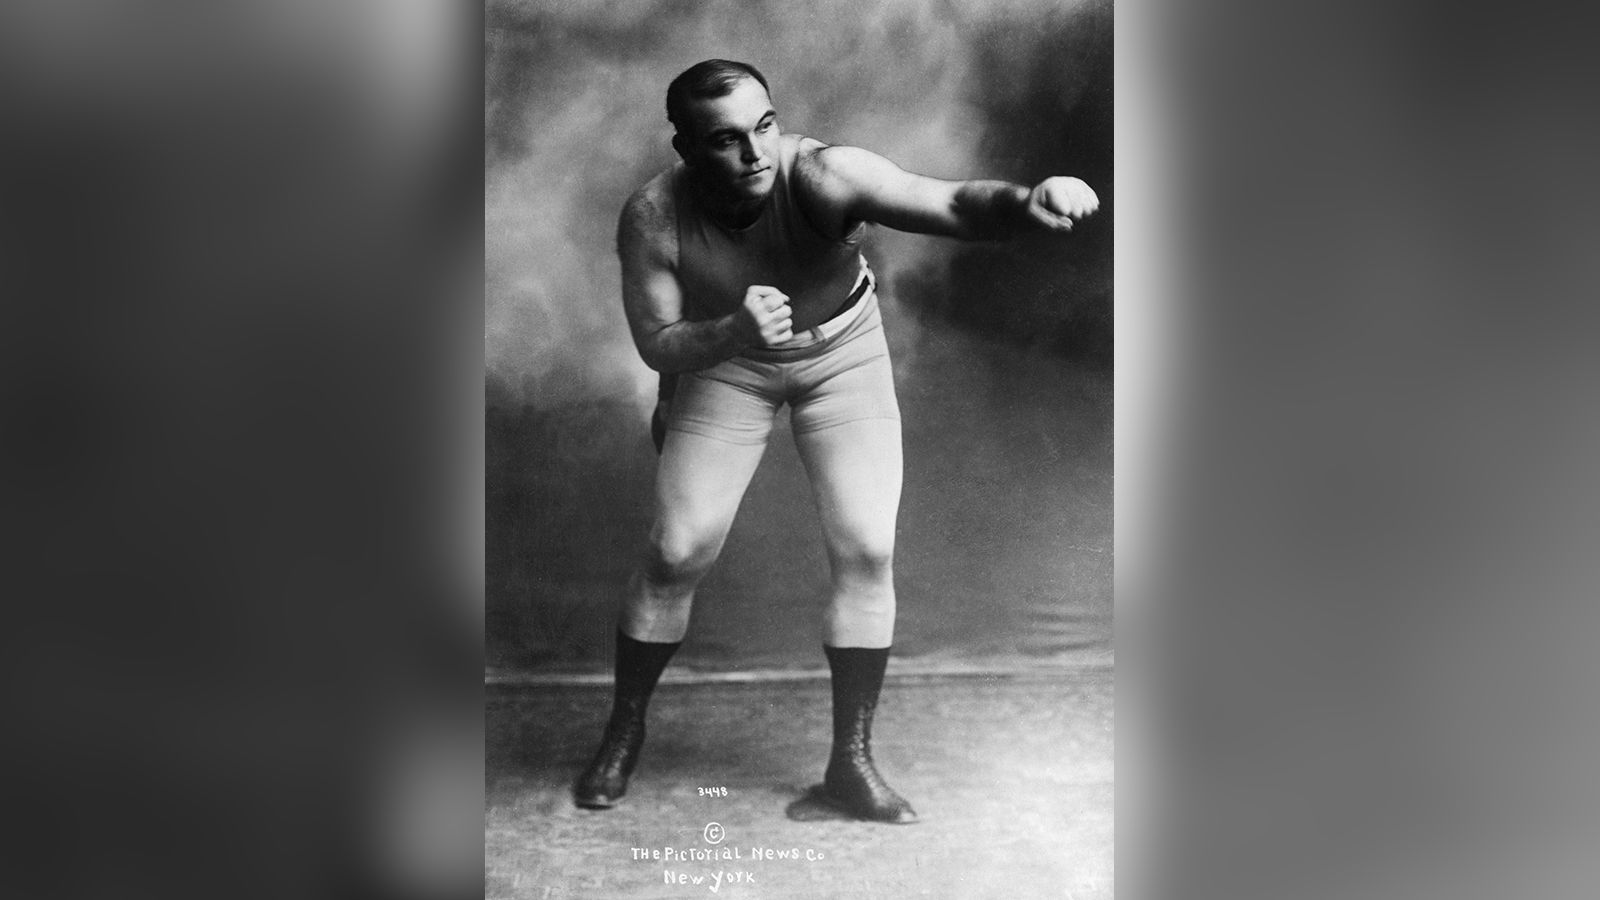 Jack Johnson was a pioneer who gave hope to black boxers everywhere, Boxing